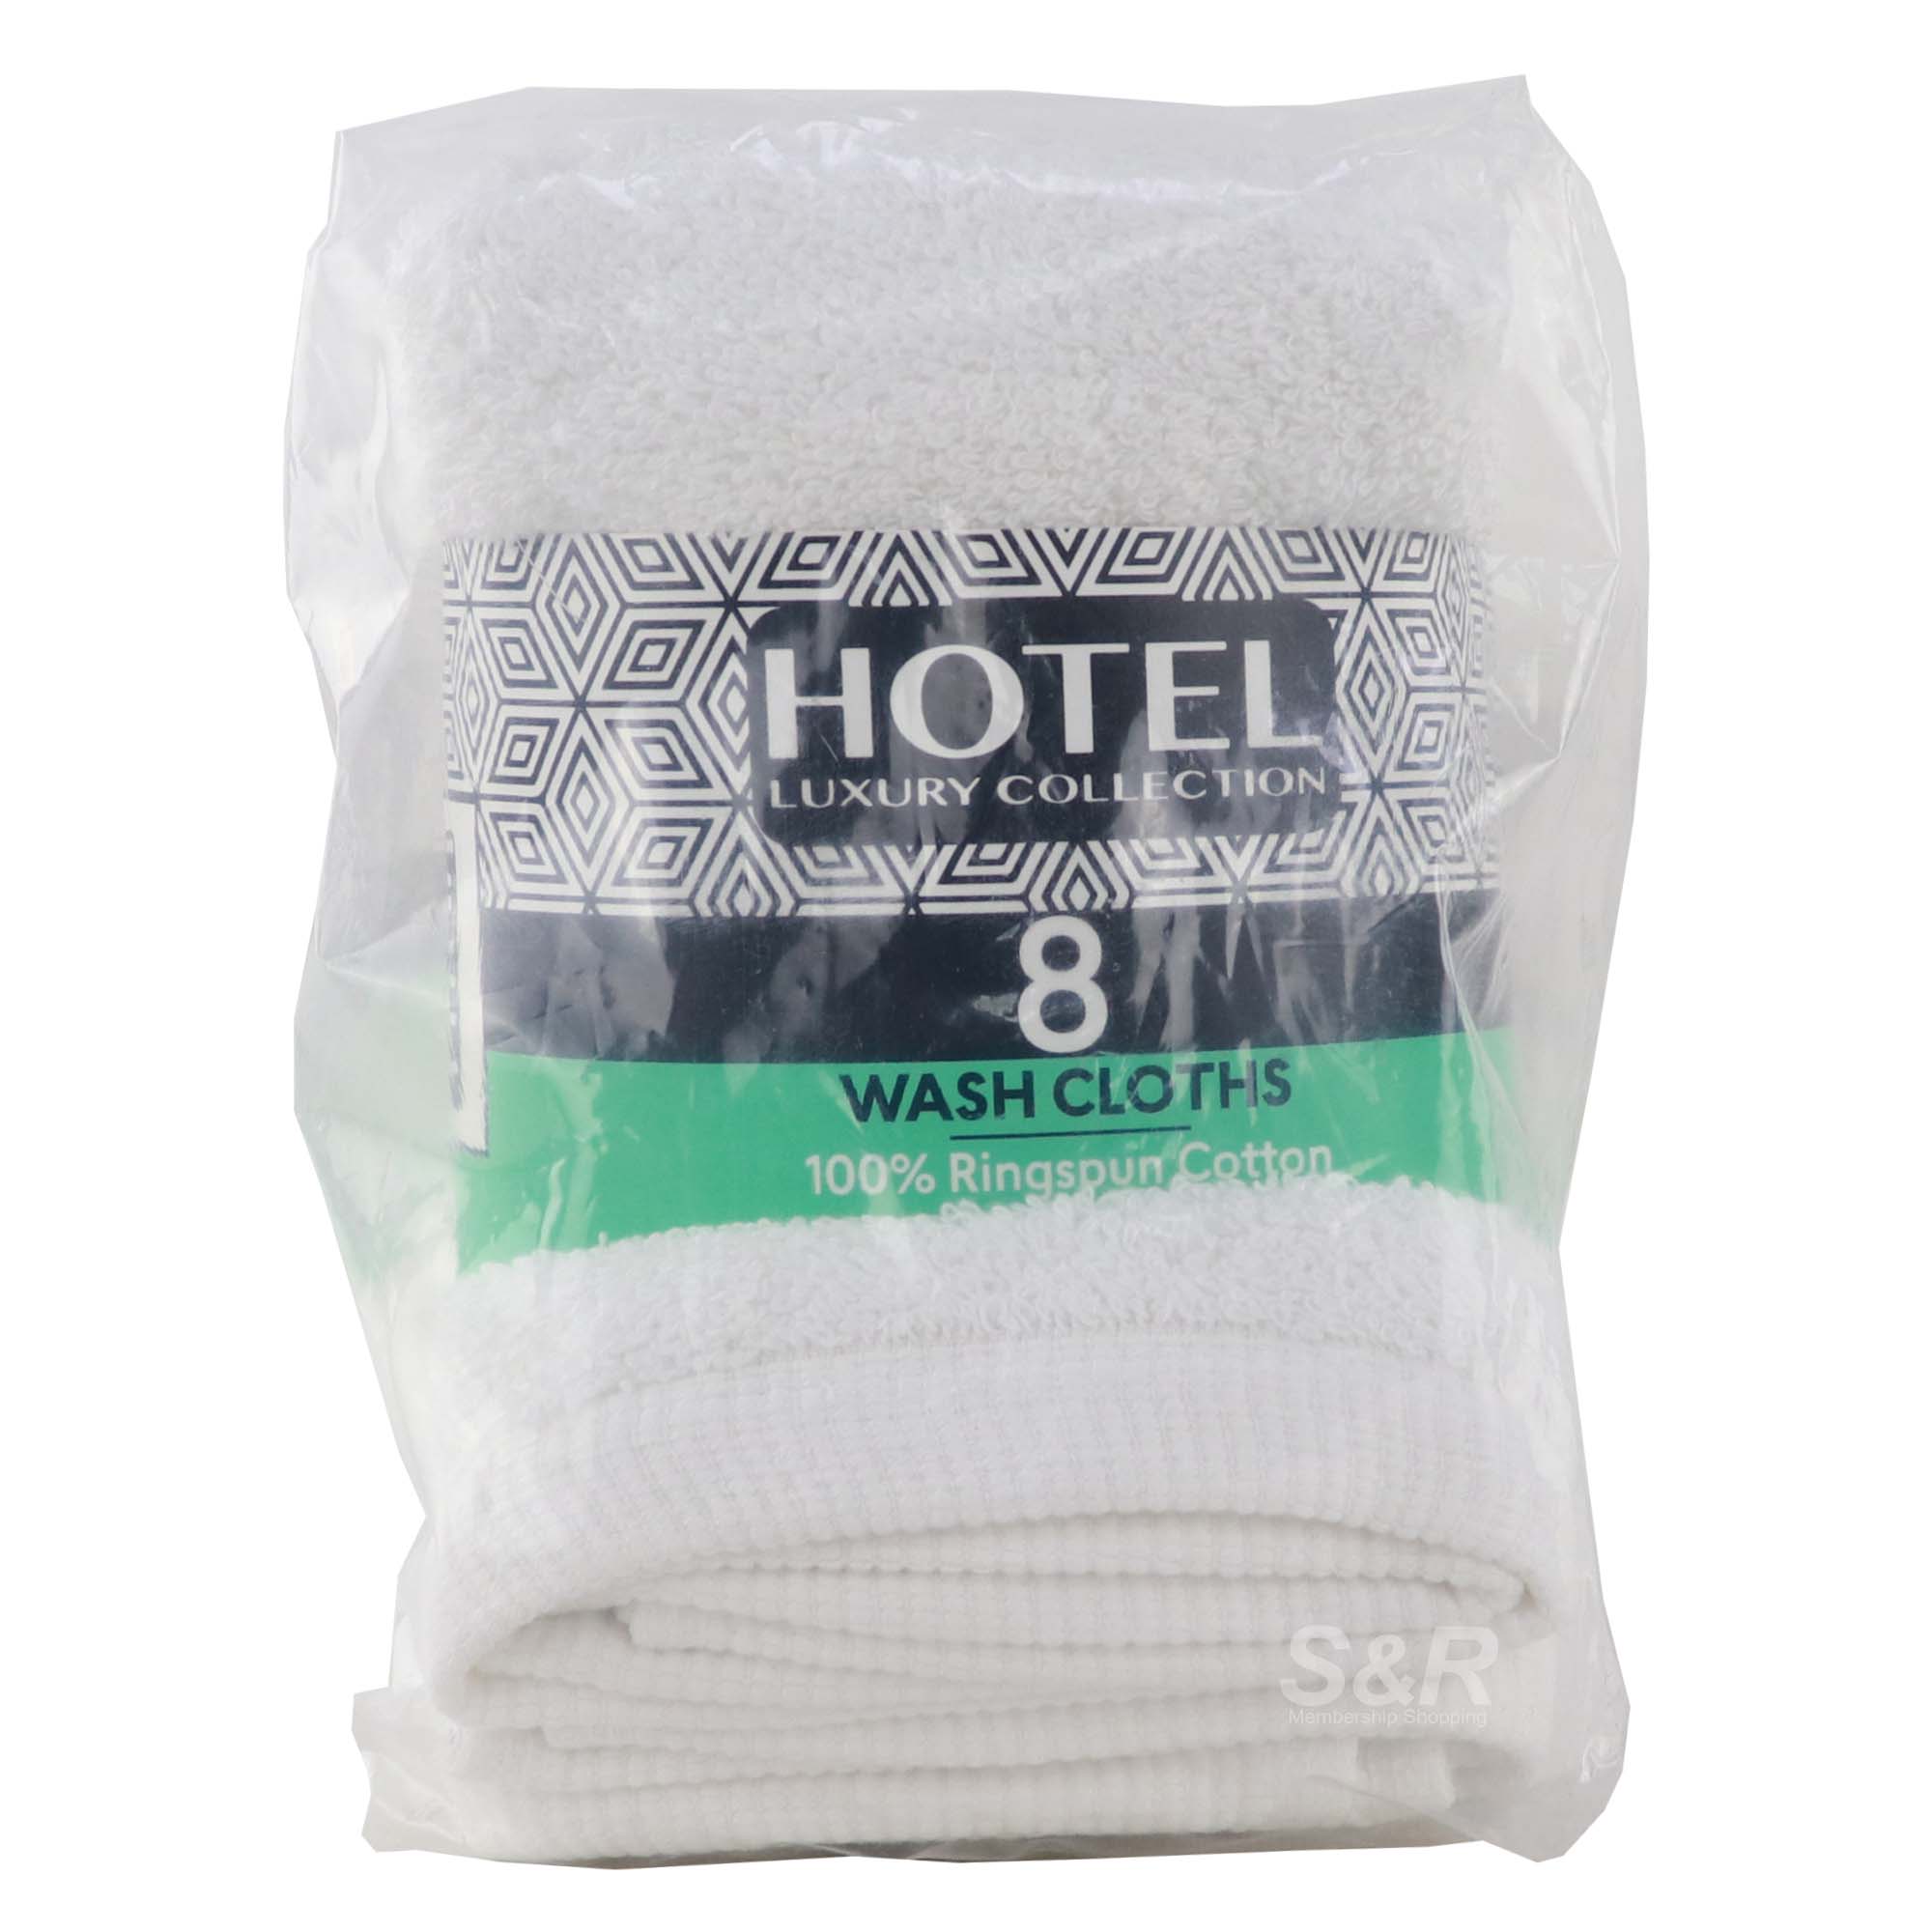 Hotel Luxury Collections Wash Cloths 8pcs